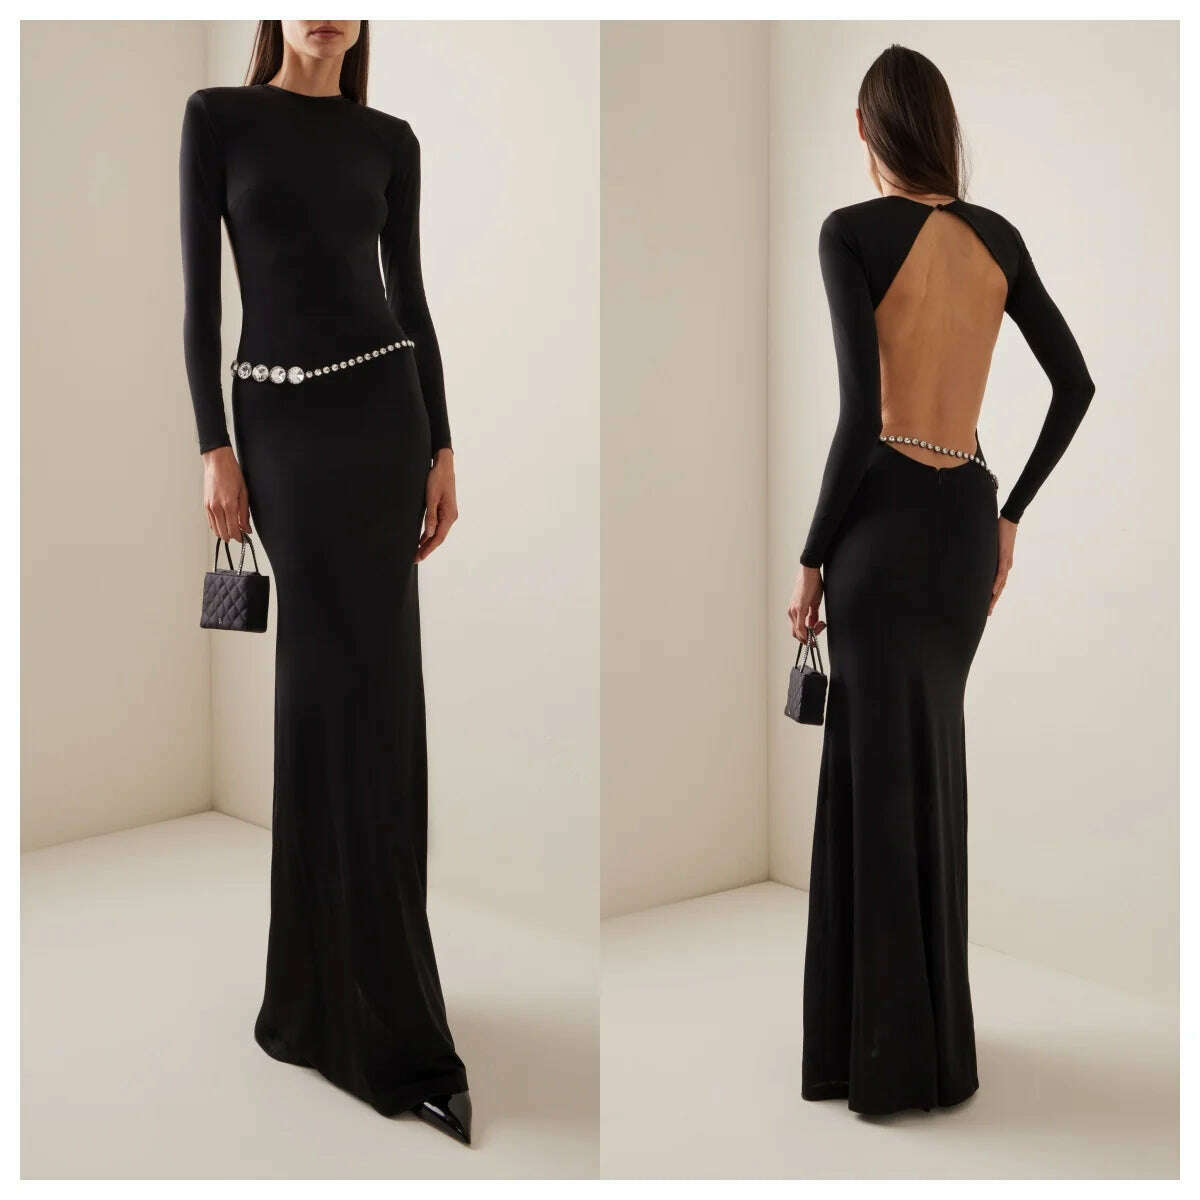 KIMLUD, Shining Diamonds Waist Chain Sexy Backless Black Long Bandage Dress Elegant Woman Evening Party Dress Cocktail Party Outfit, KIMLUD Women's Clothes